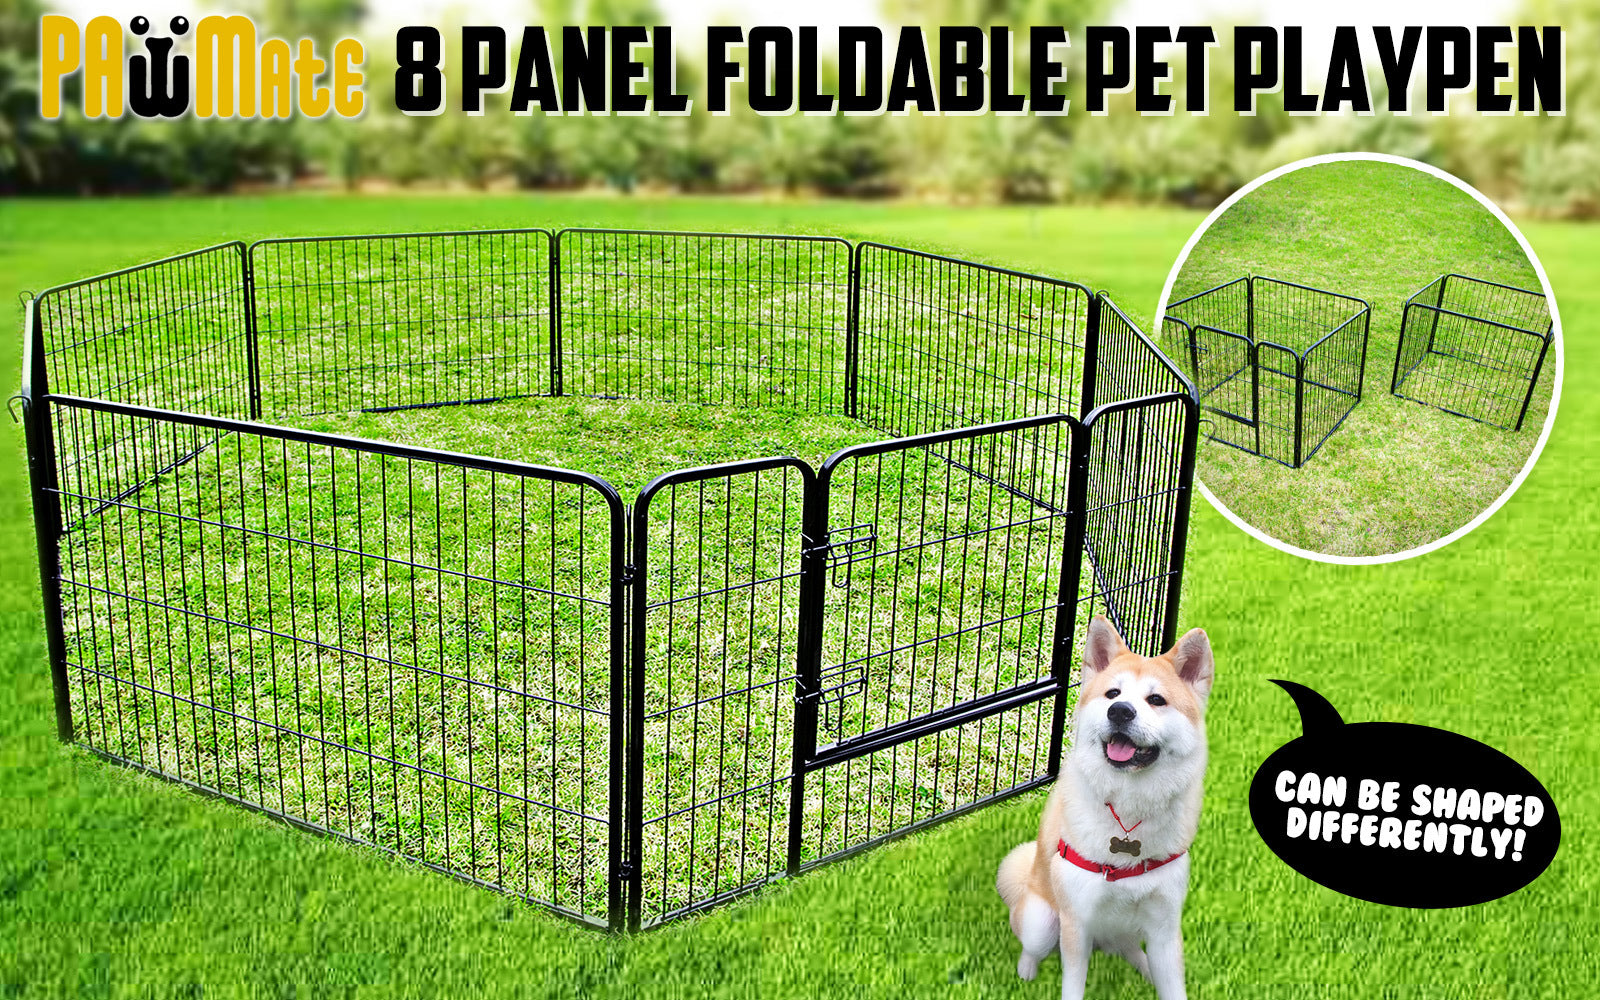 Pet Playpen Heavy Duty 31in 8 Panel Foldable Dog Cage + Cover - image2